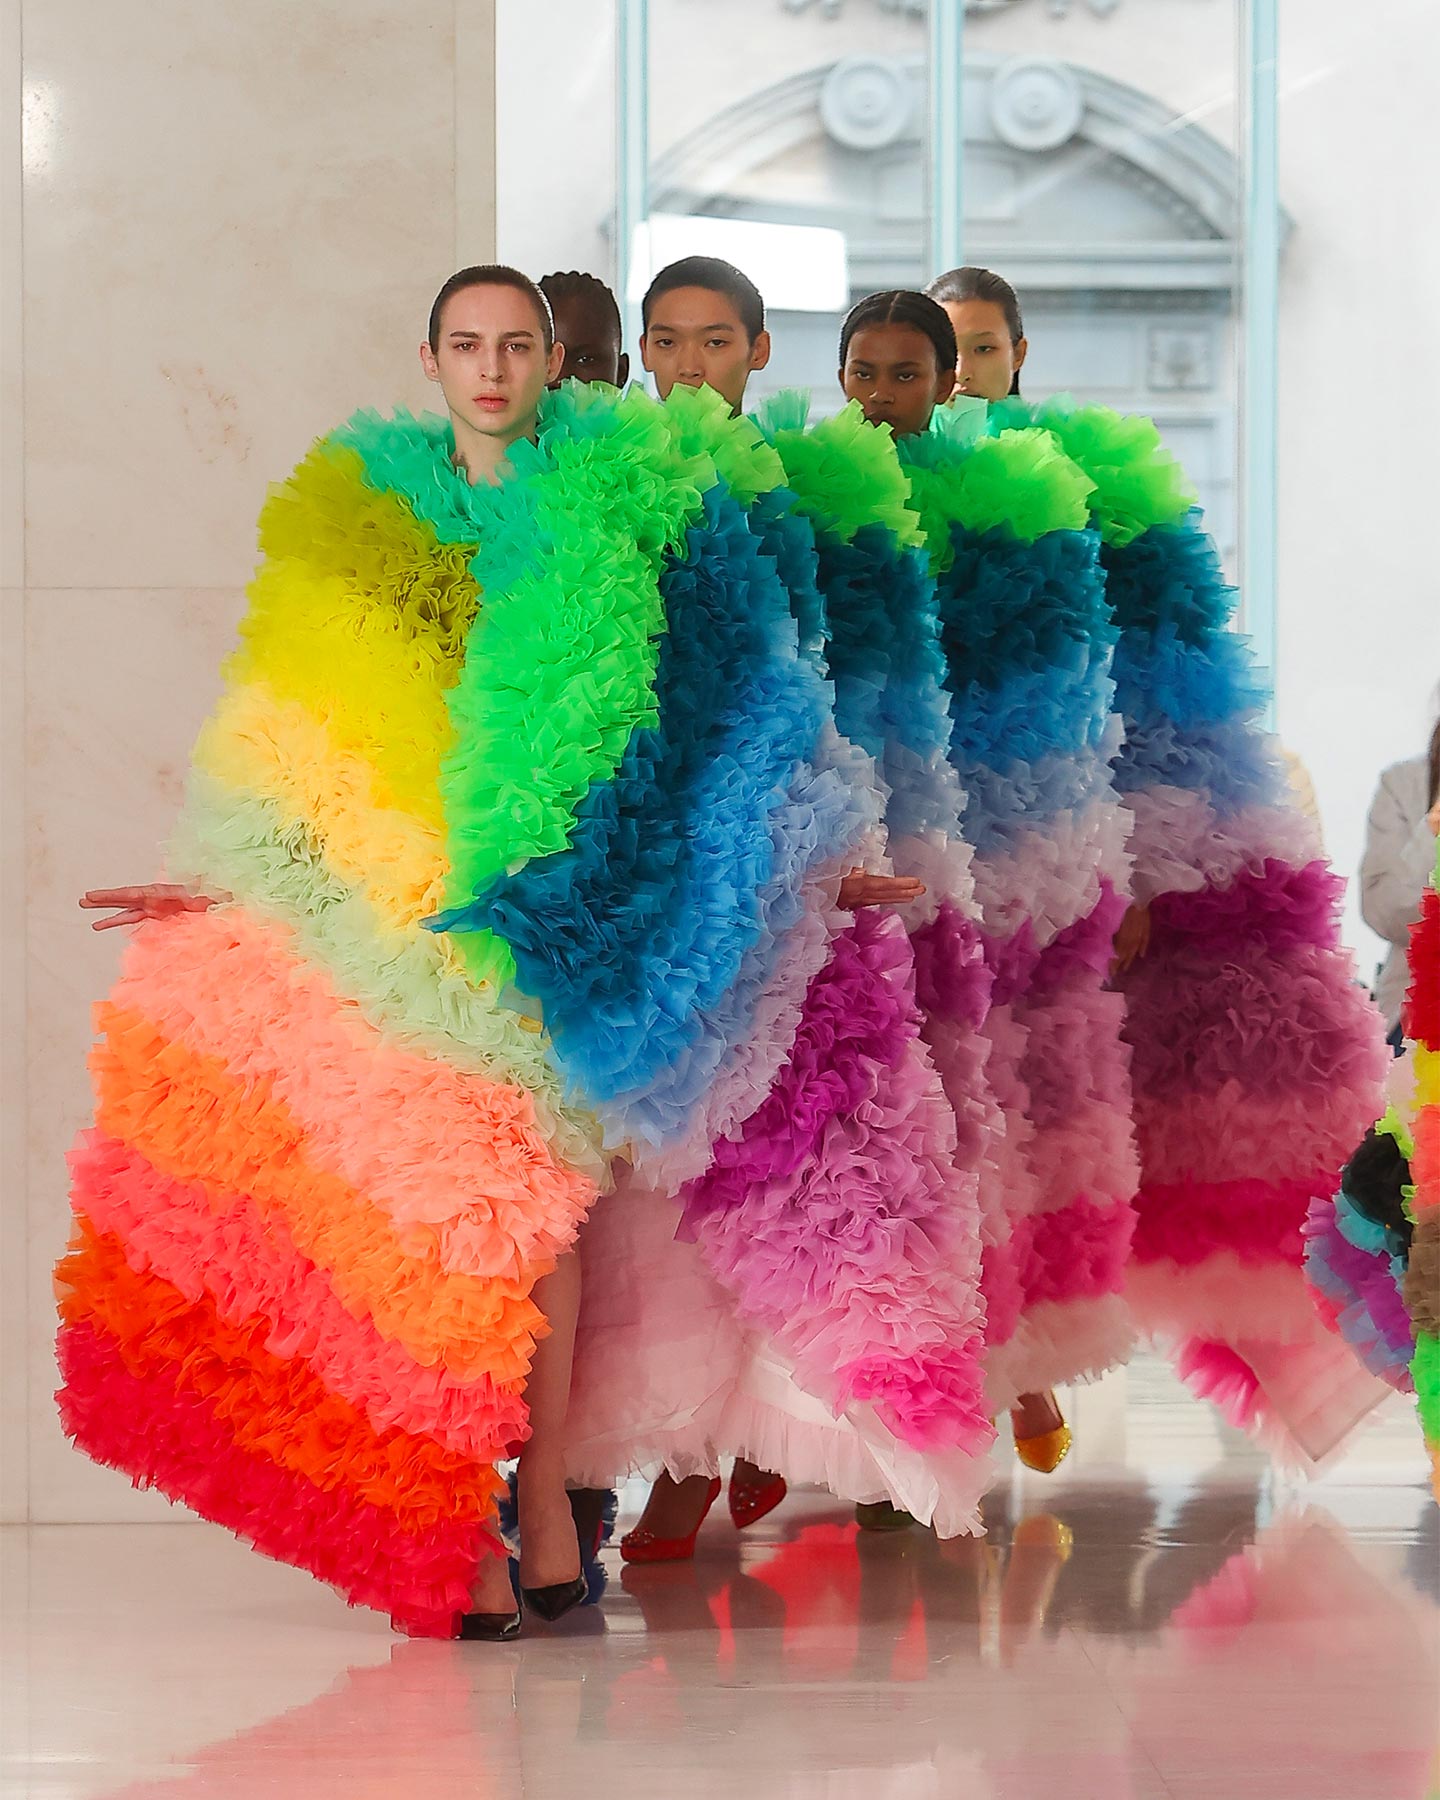 A five-person rainbow dress walked the runway at Tomo Koizumi's show finale as part of his fall 2023 collection, made in collaboration with Dolce&Gabbana and unveiled during the latest Milan Fashion Week